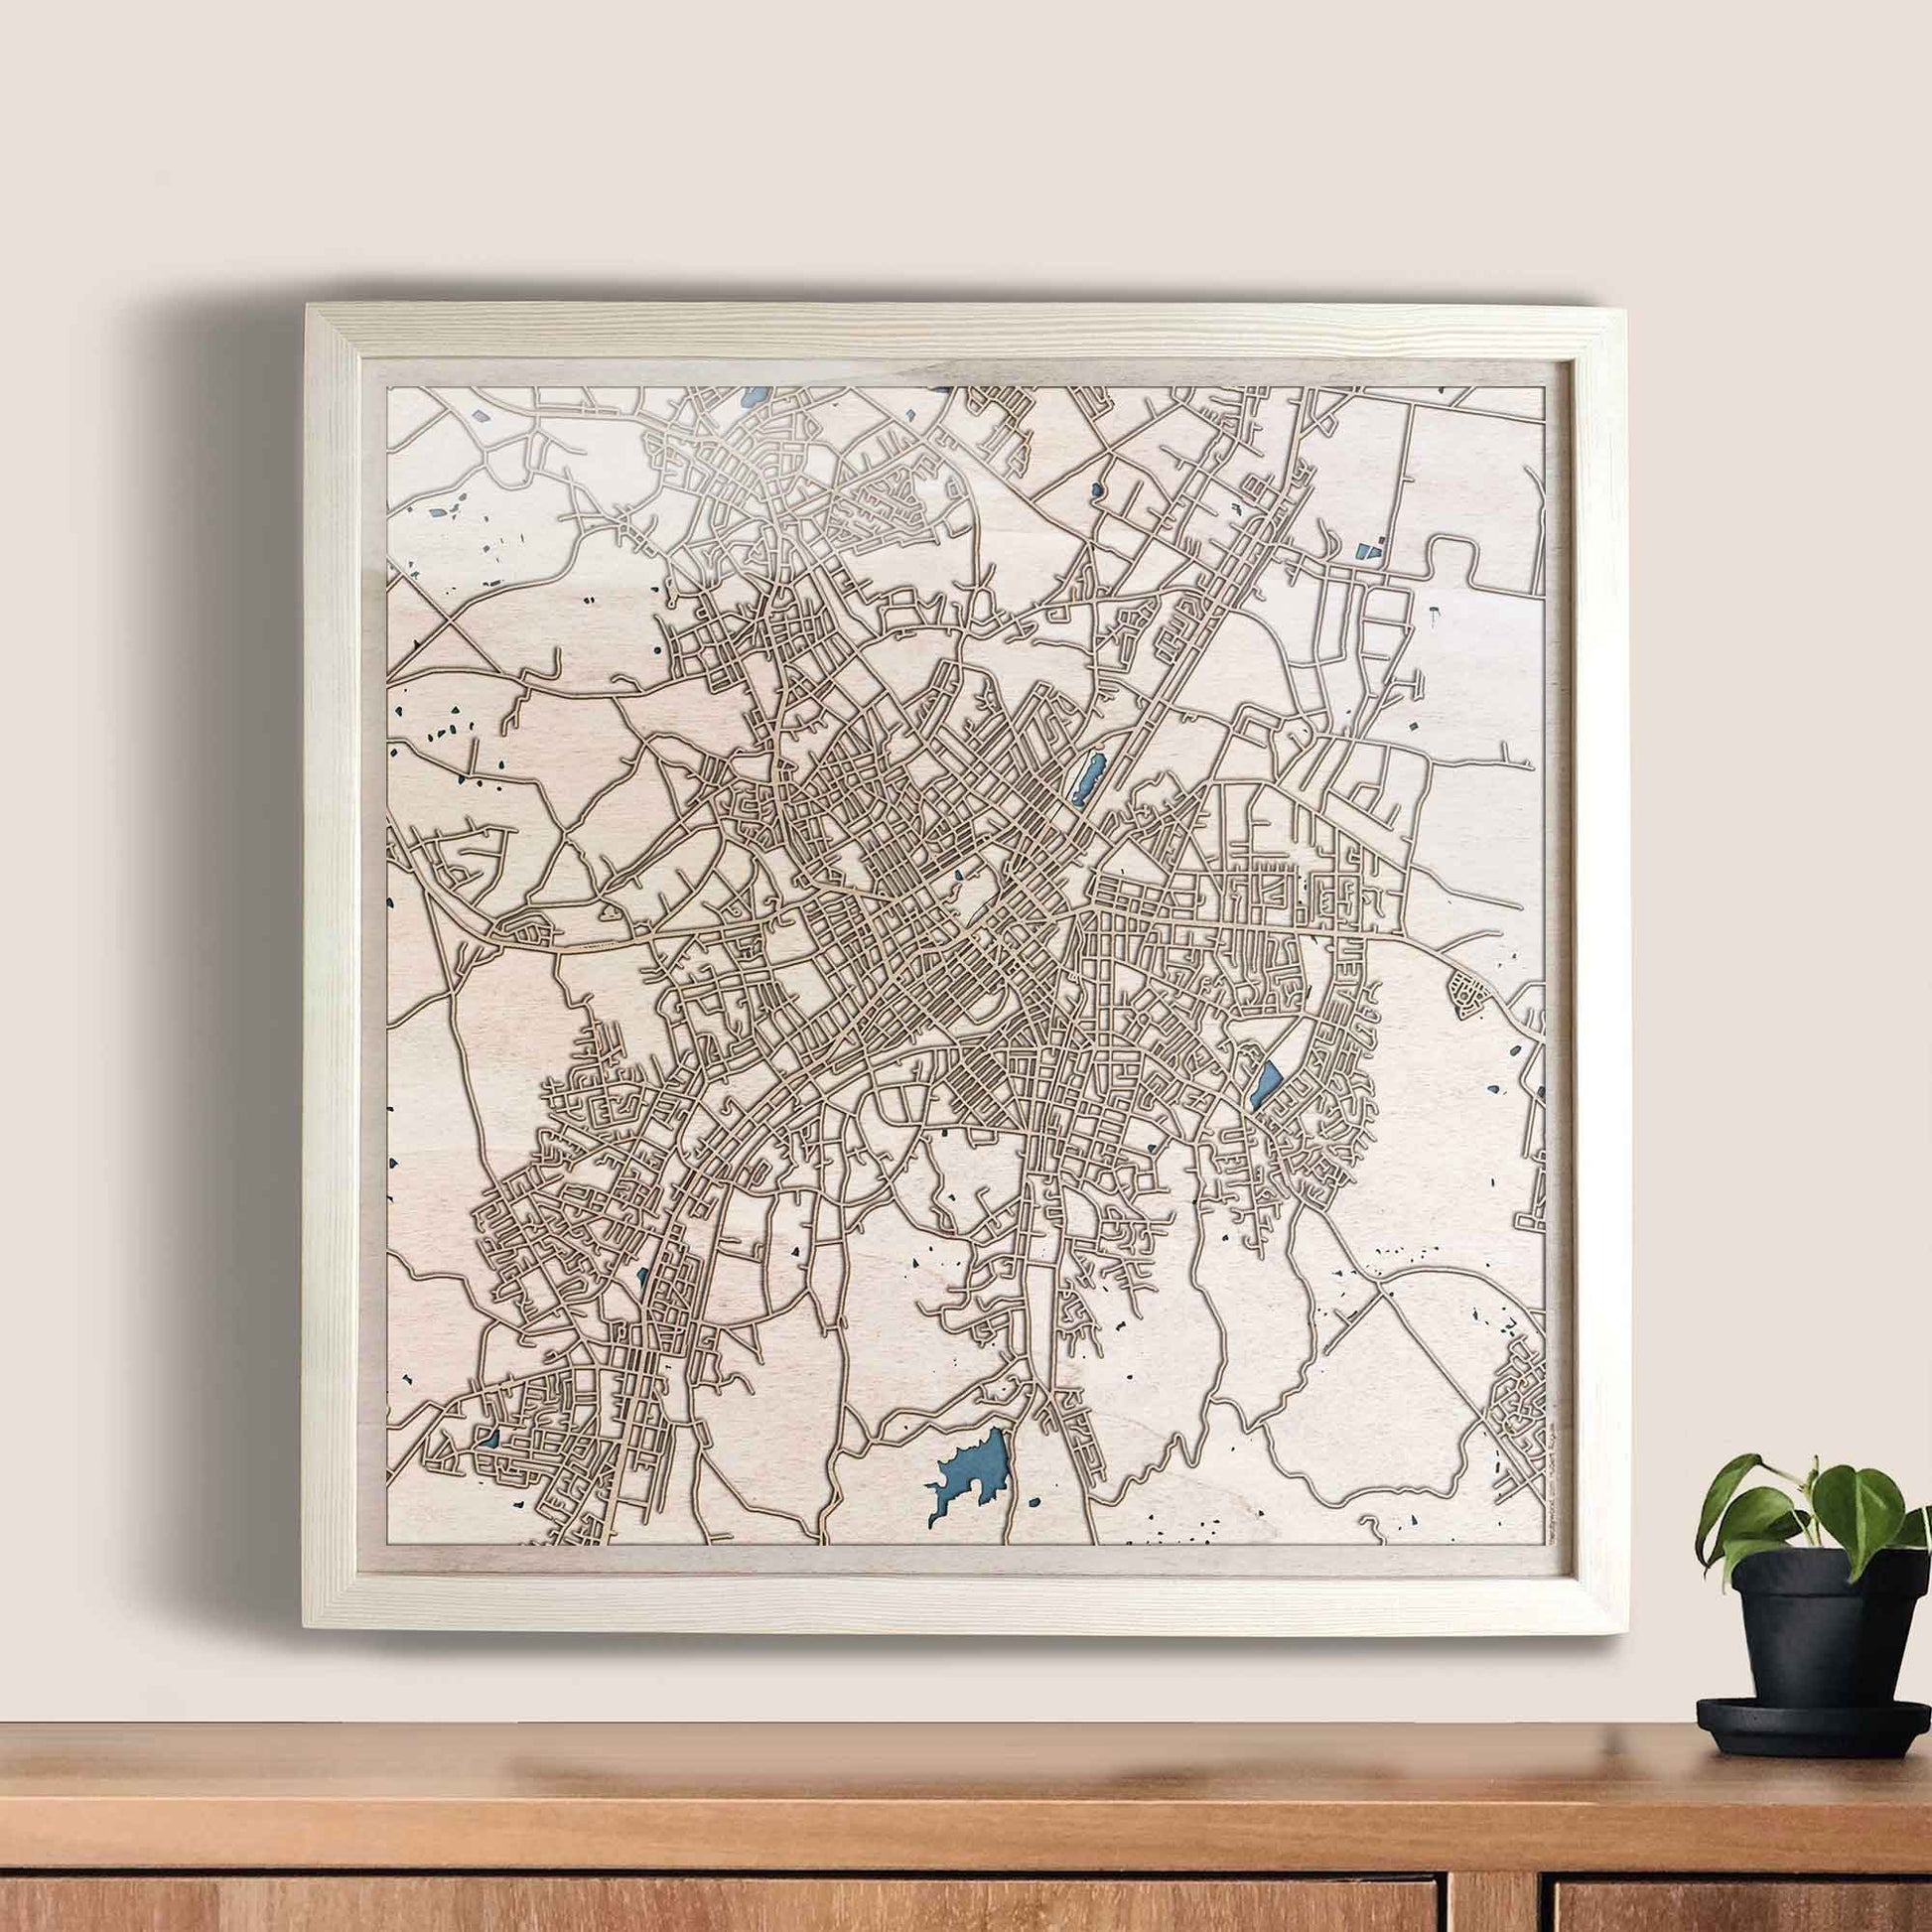 Bendigo Wooden Map by CityWood - Custom Wood Map Art - Unique Laser Cut Engraved - Anniversary Gift